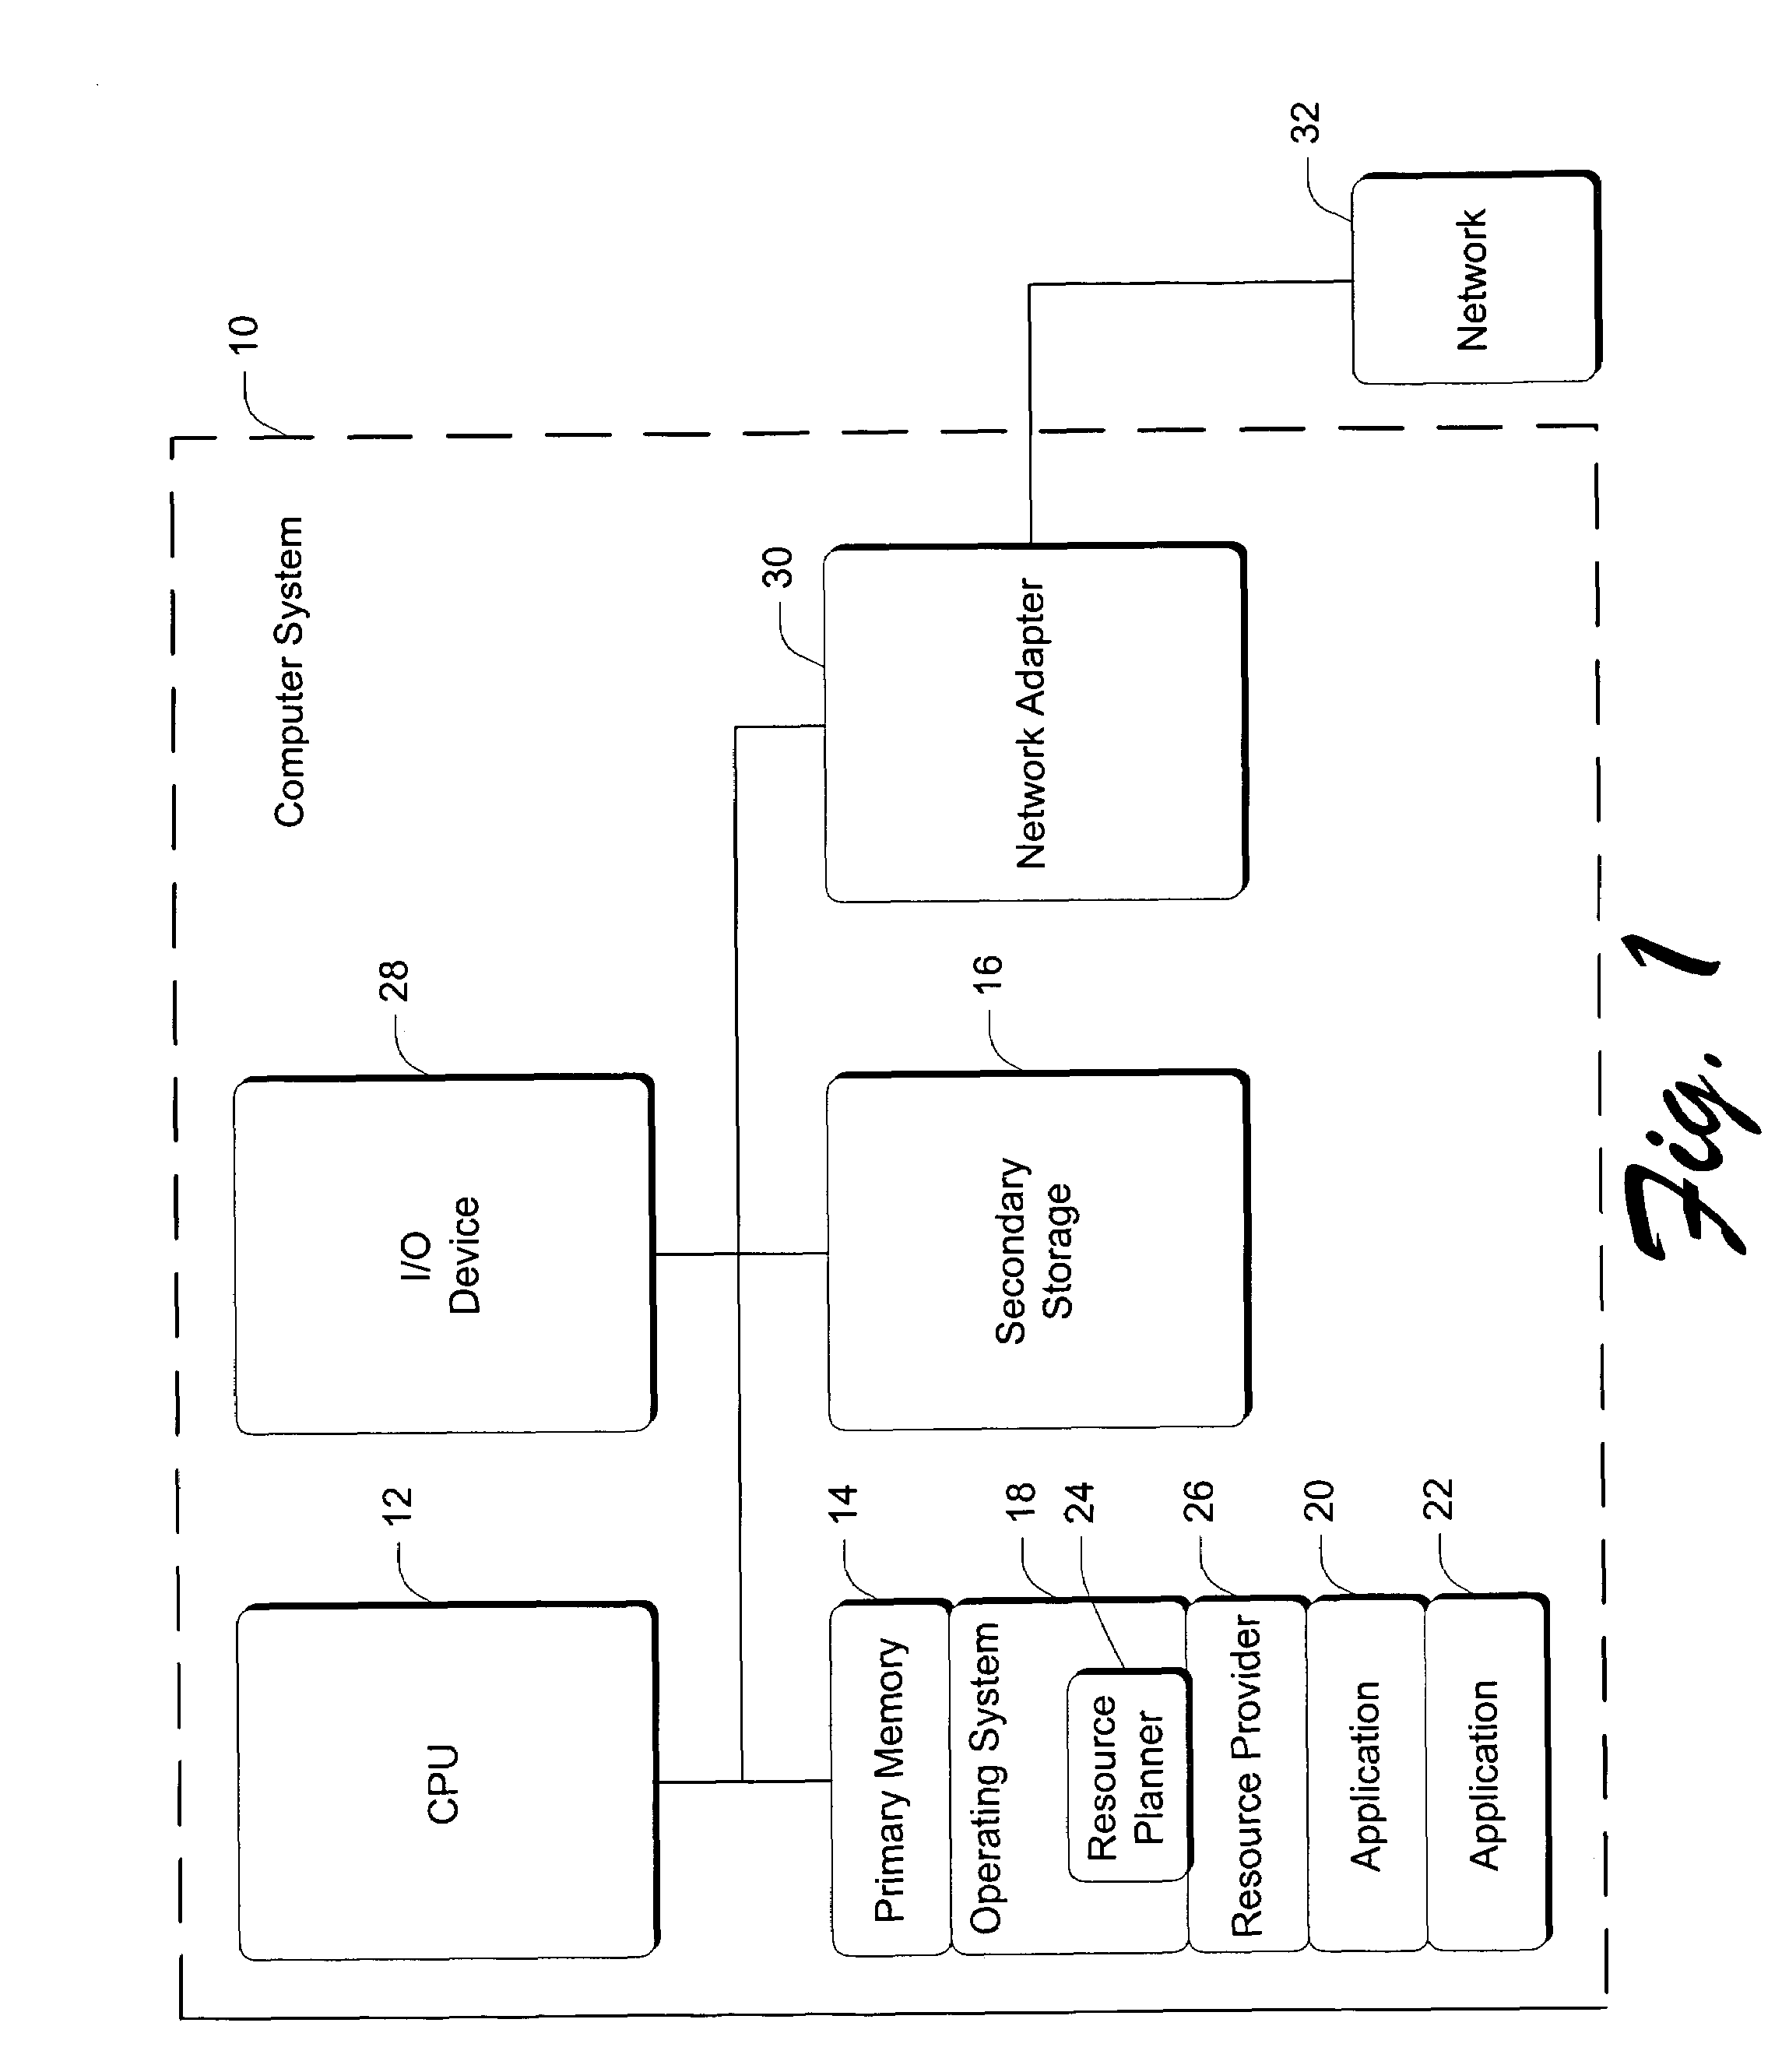 Method and system for resource management with independent real-time applications on a common set of machines